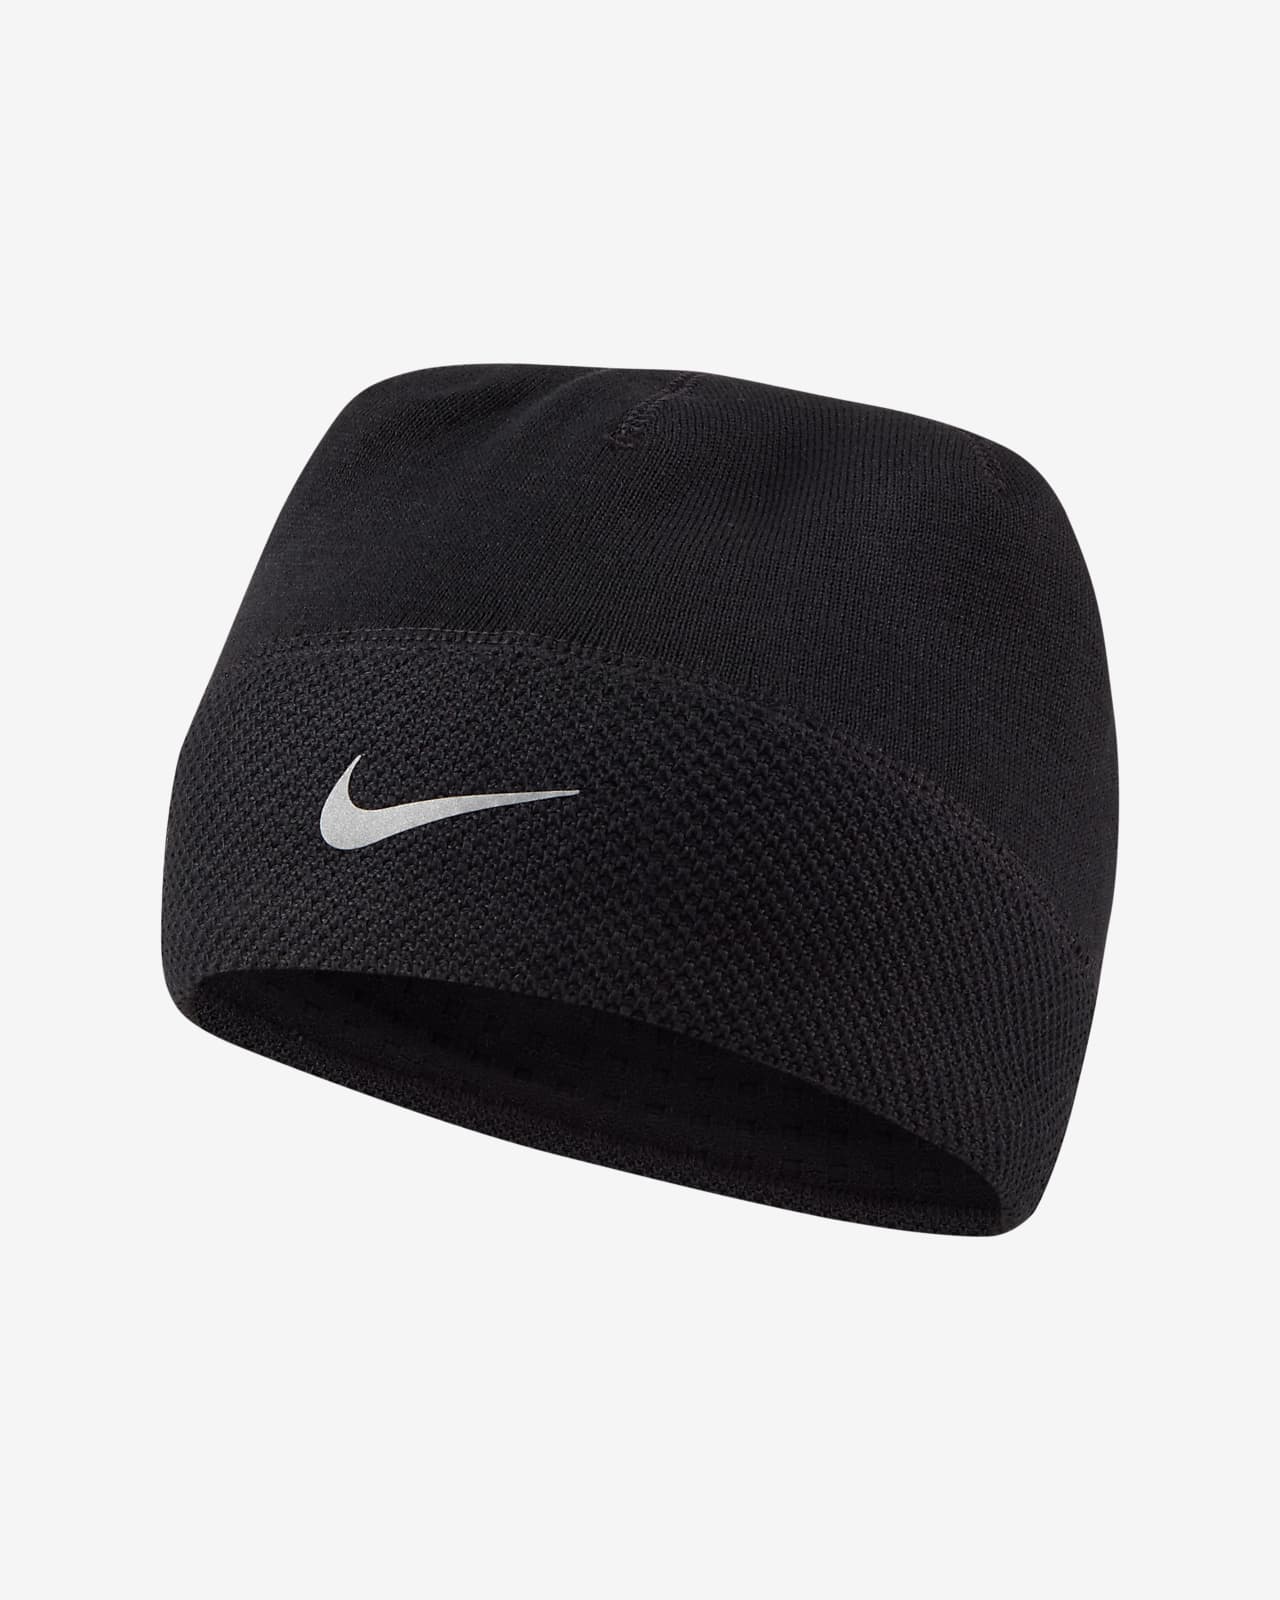 Nike Dri-Fit Thermal Running Hat and Glove Set Black/Anthracite